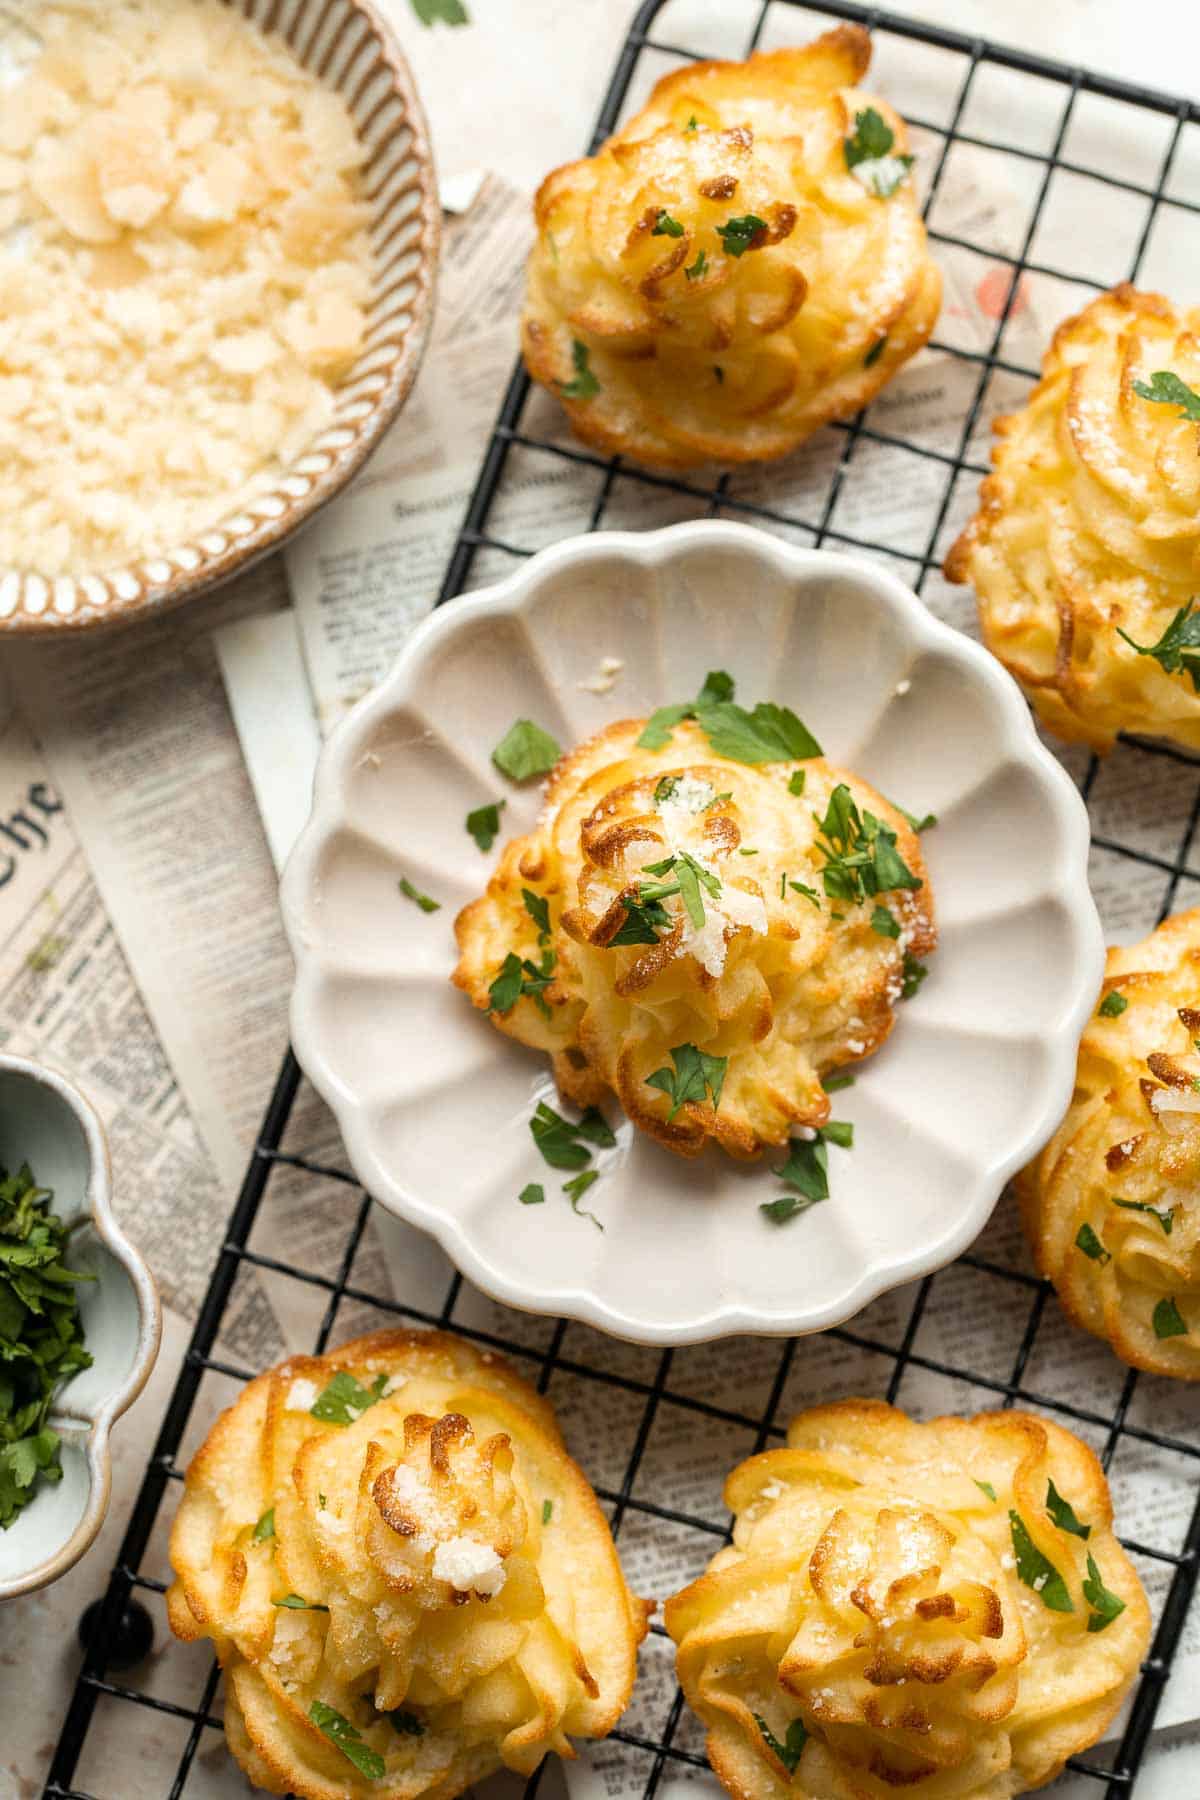 Duchess Potatoes (Pommes Duchesse) are rich, creamy whipped bites of potatoes with crispy edges and a soft fluffy mashed potato centre. A fancy side dish! | aheadofthyme.com